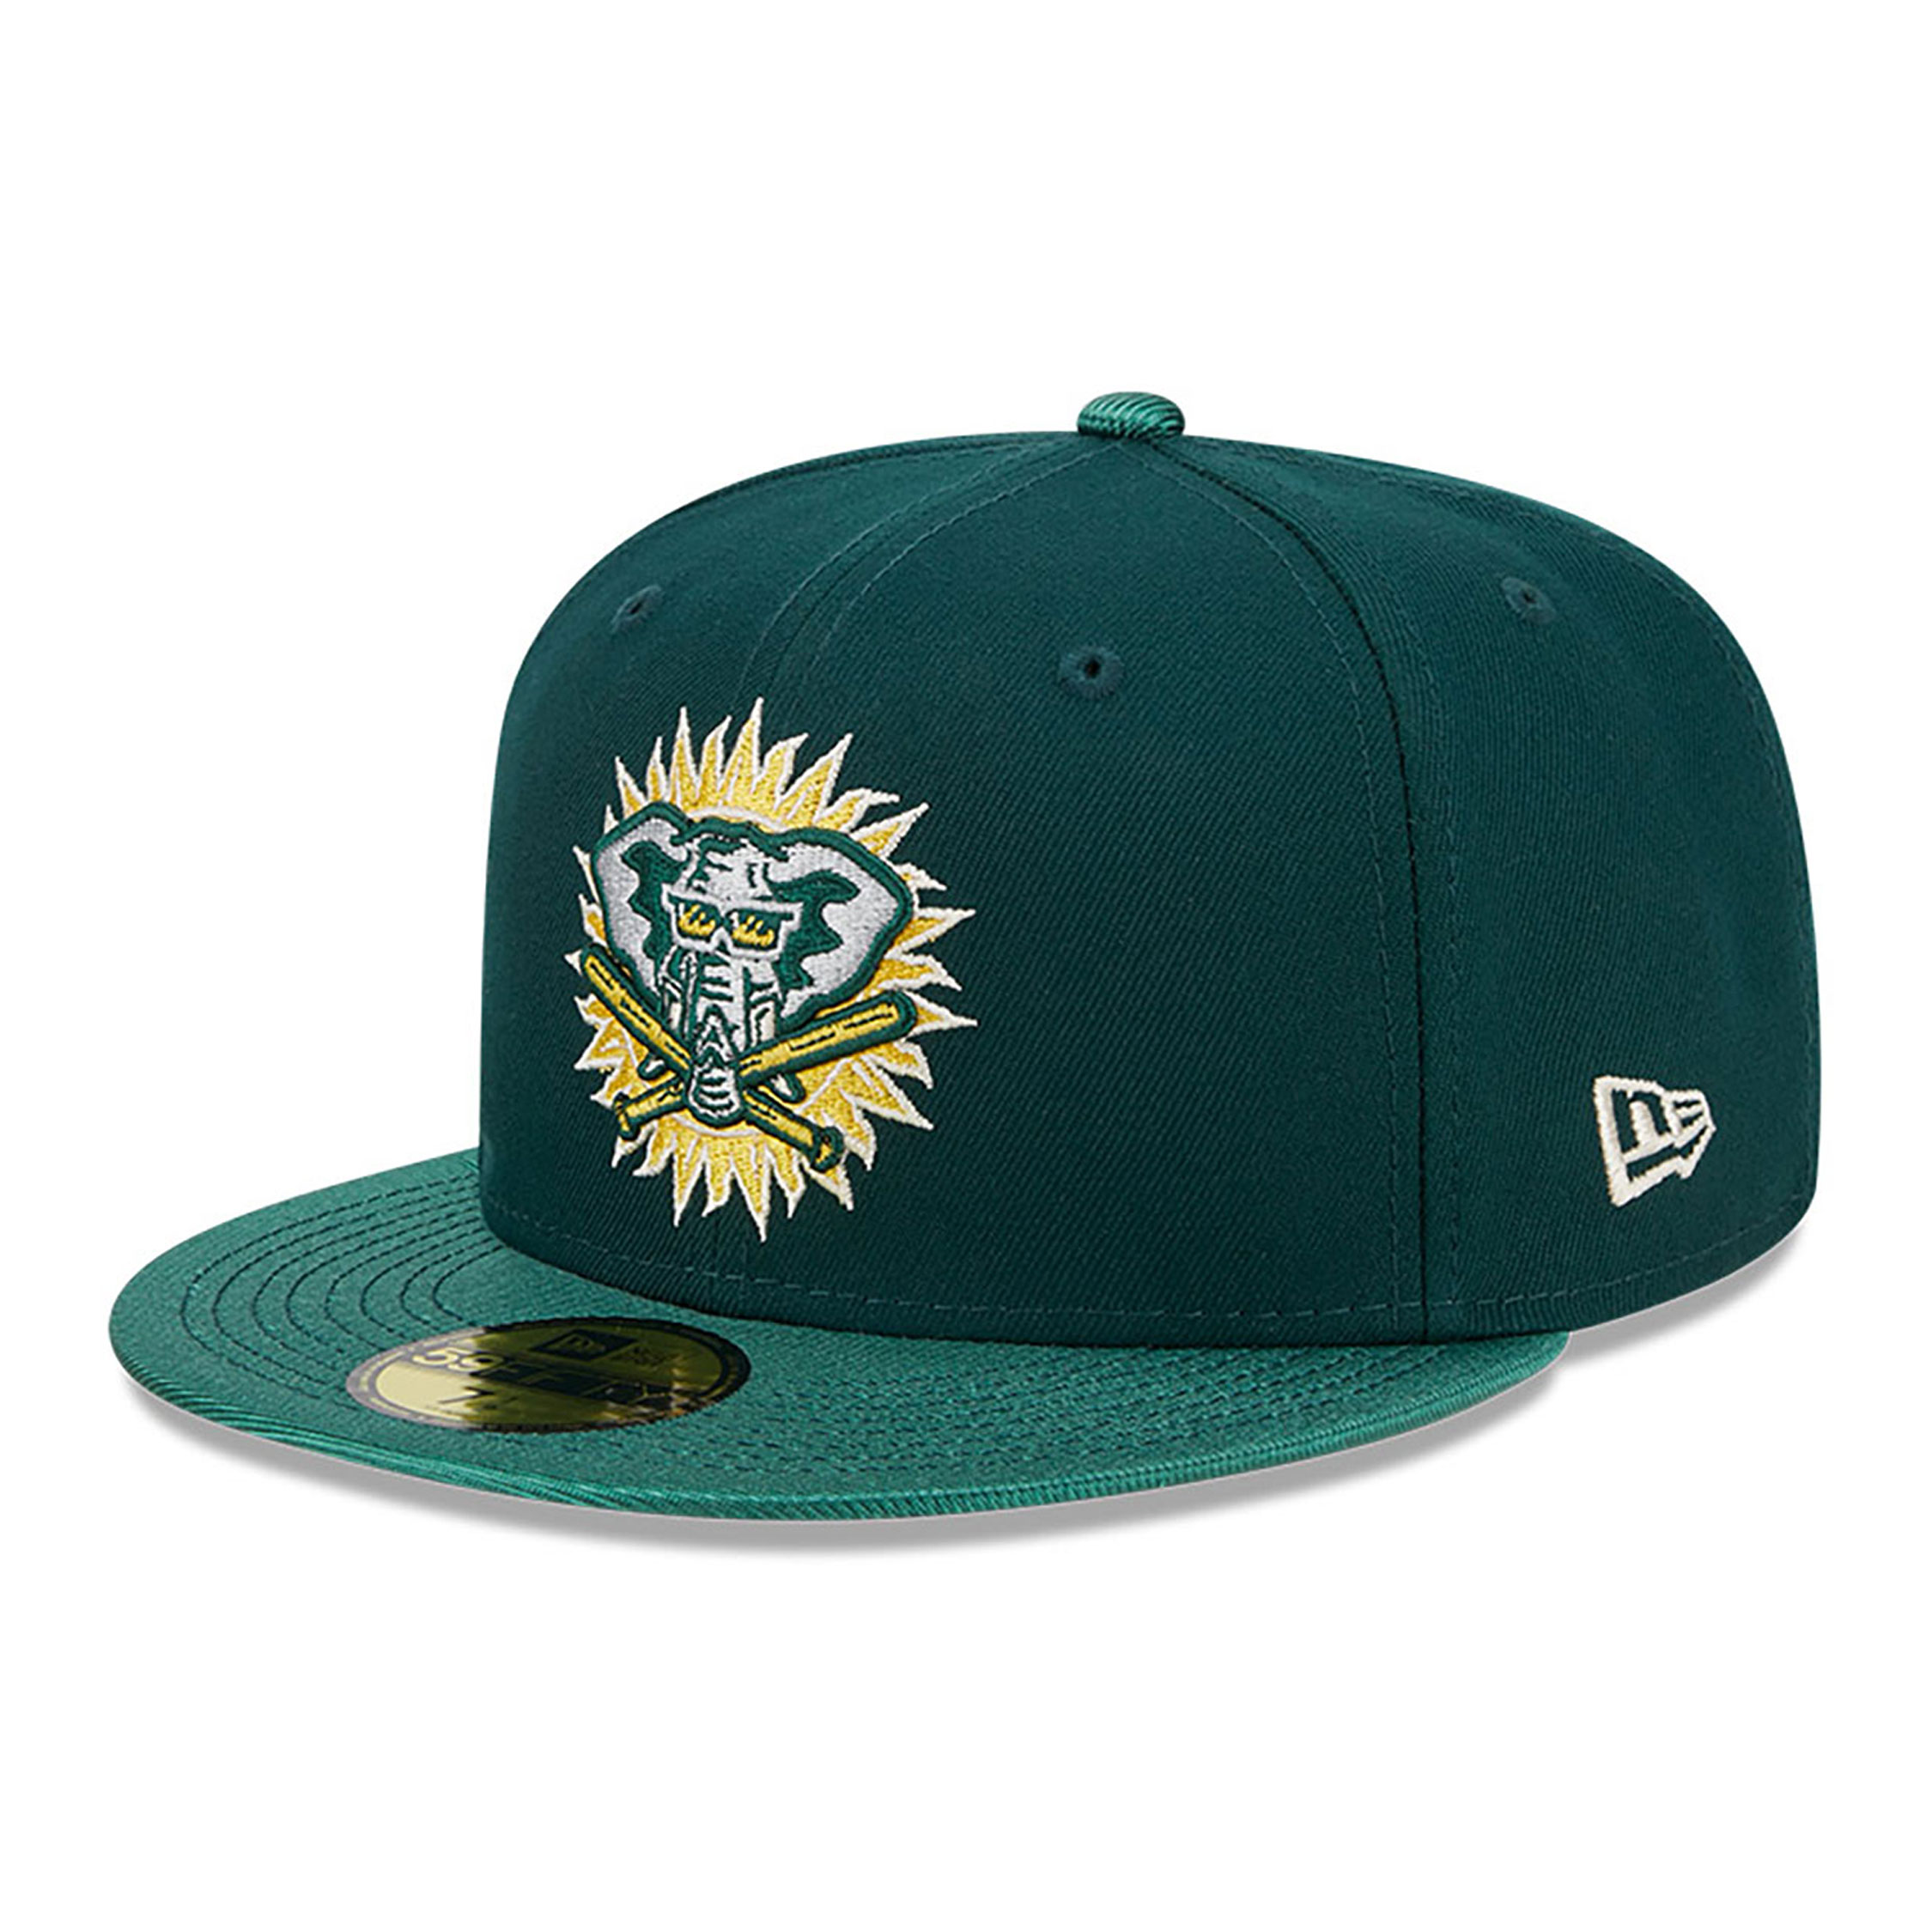 59FIFTY Oakland Athletics Team Shimmer Verde Scuro